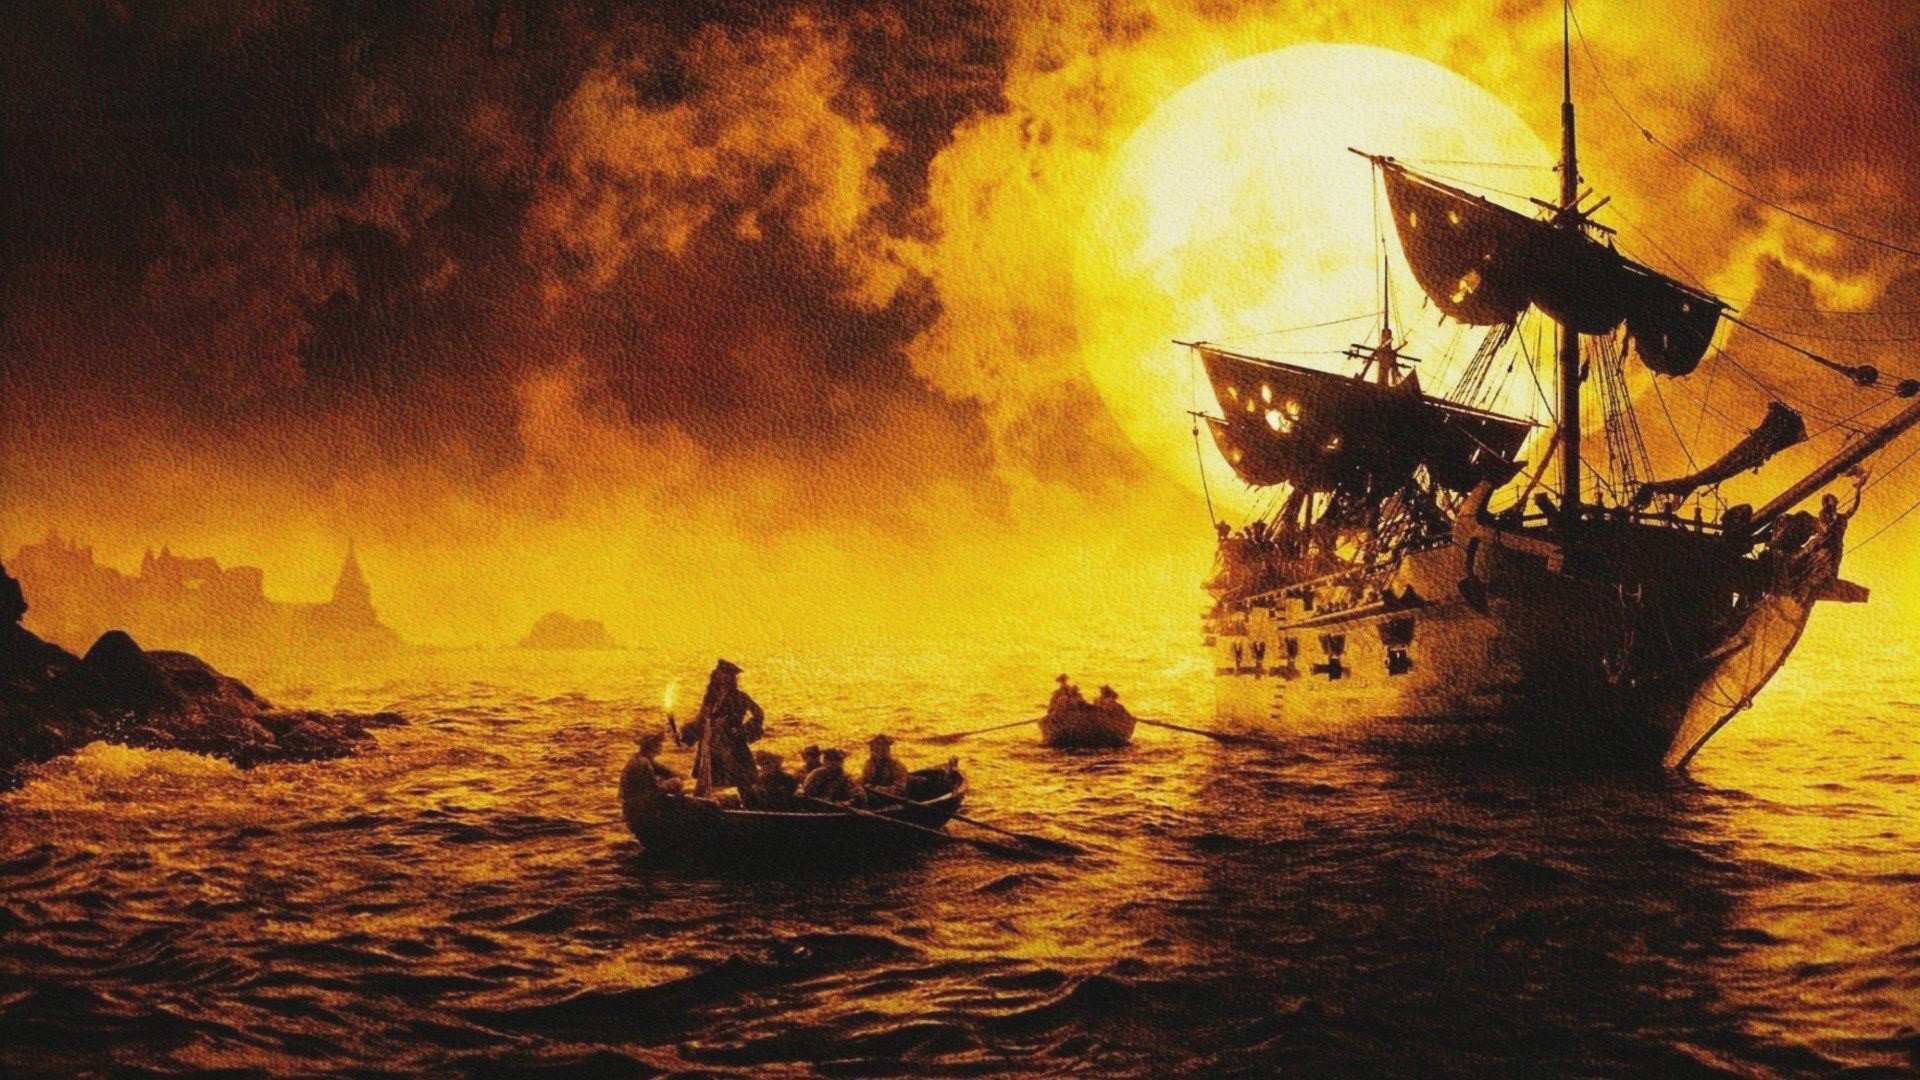 1920x1080 Pirates Of the Caribbean: the Curse Of the Black Pearl New Desktop Wallpaper  Free